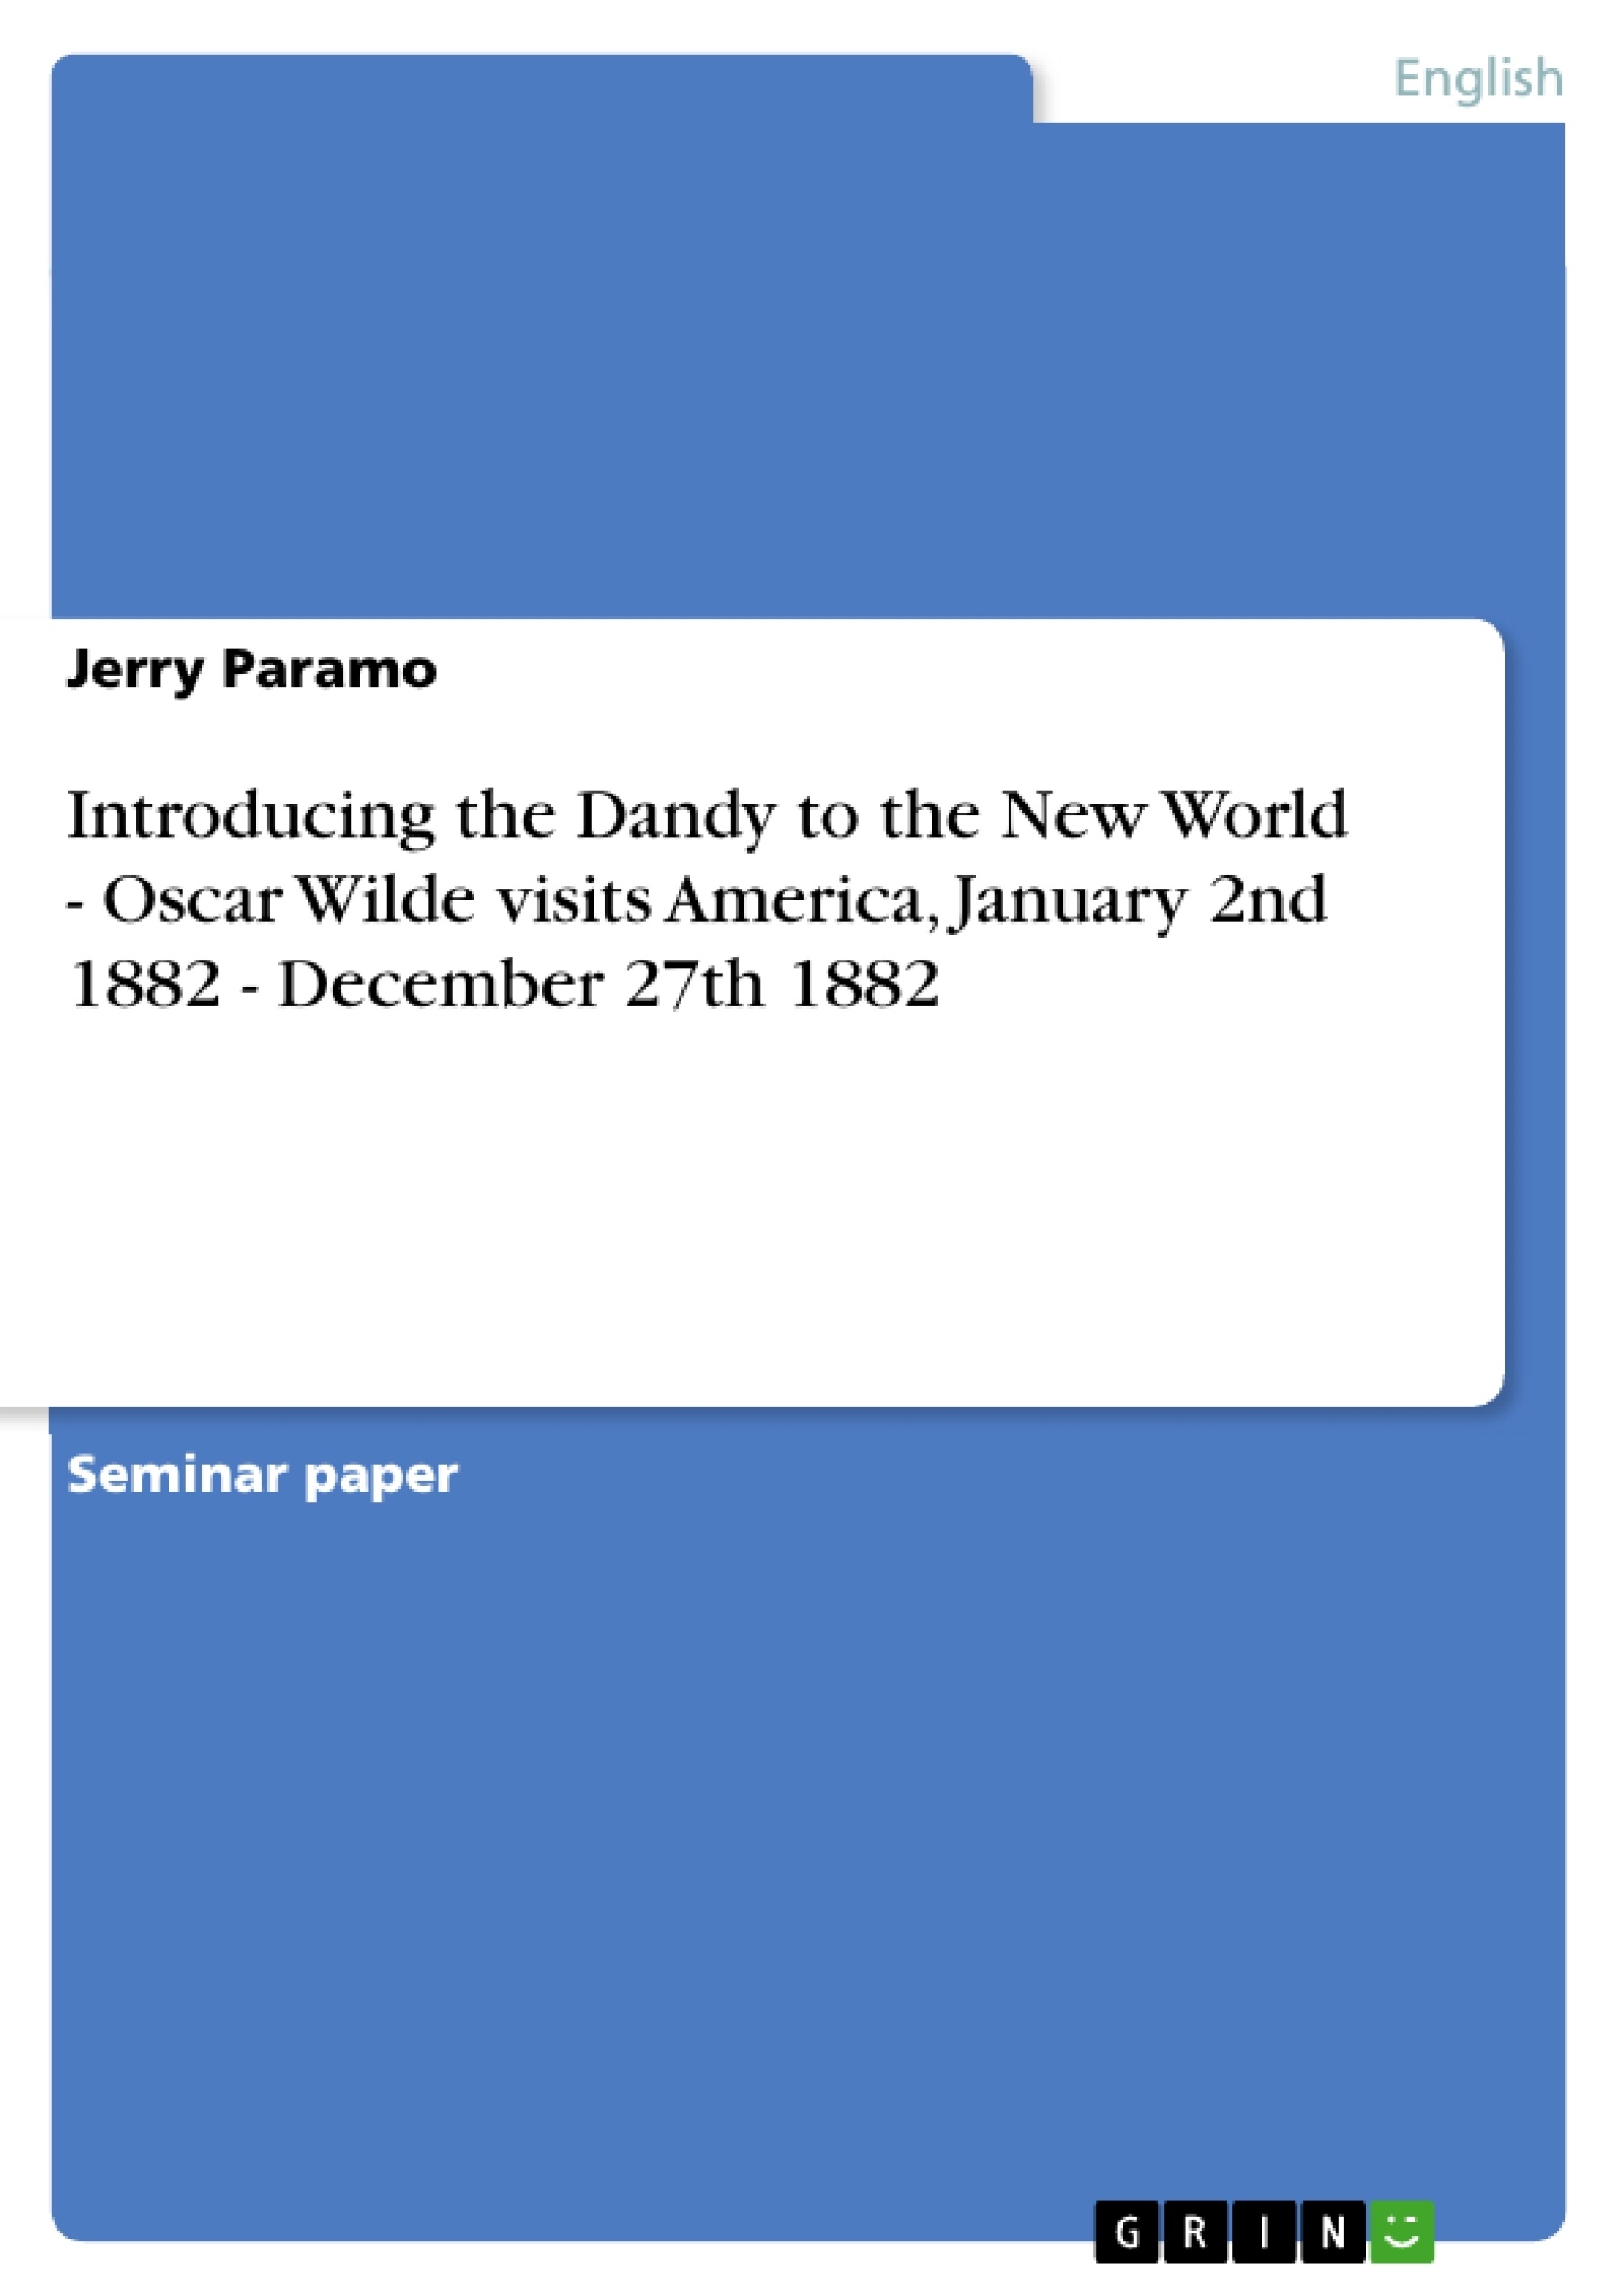 Title: Introducing the Dandy to the New World - Oscar Wilde visits America, January 2nd 1882 - December 27th 1882